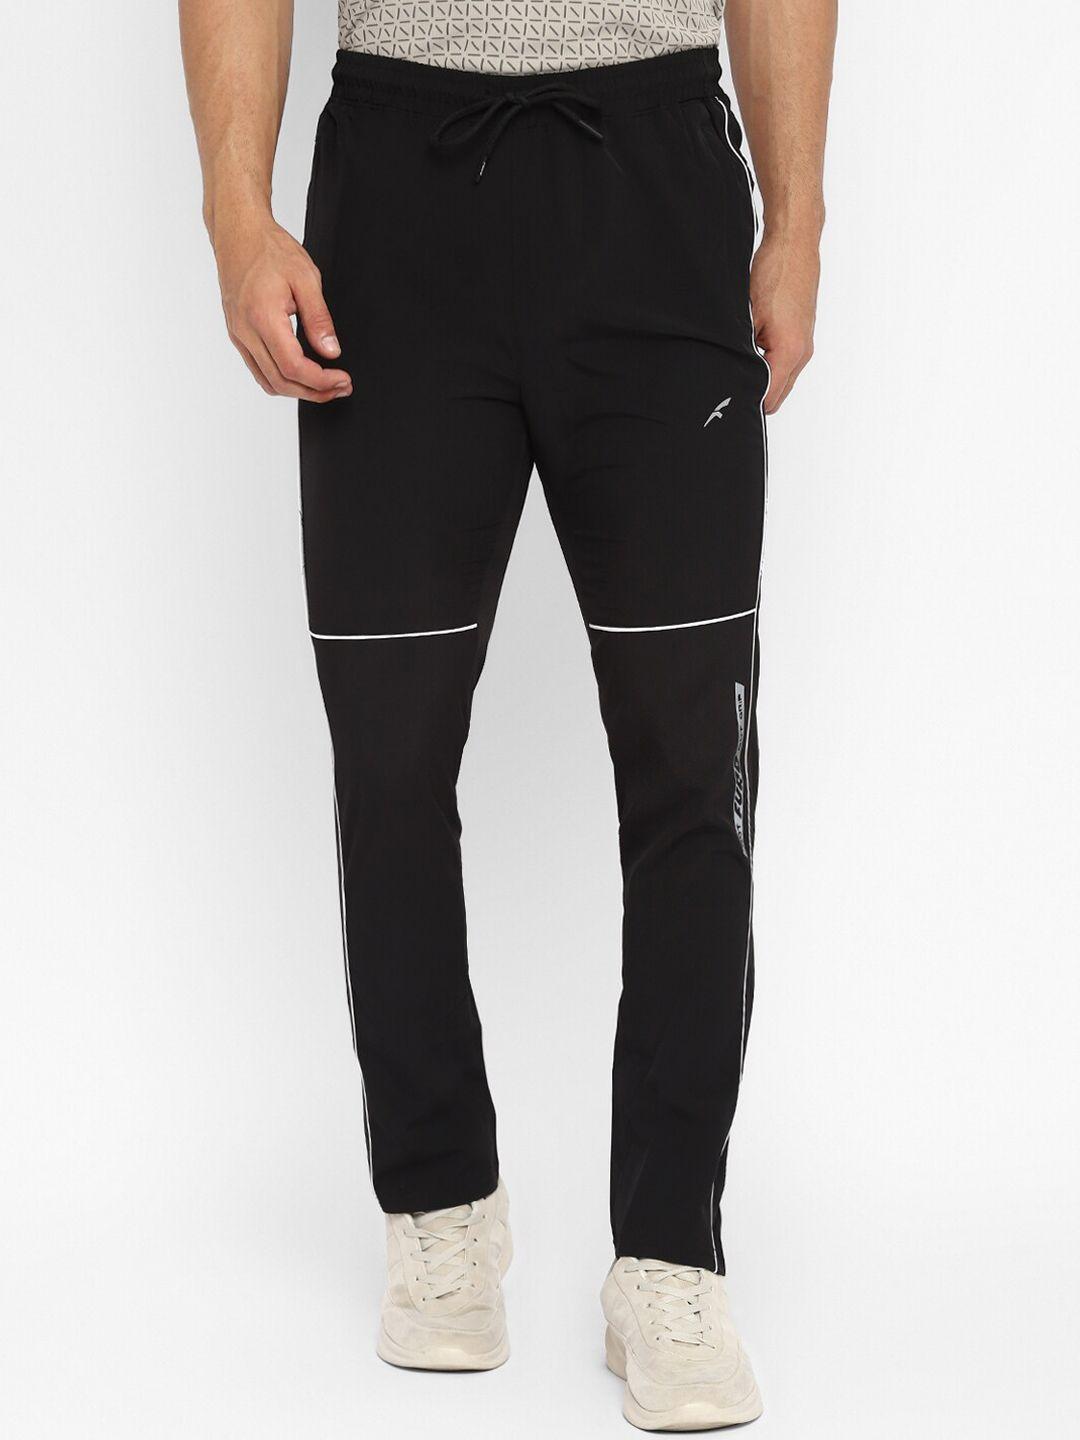 furo-by-red-chief-men-black-solid-track-pants